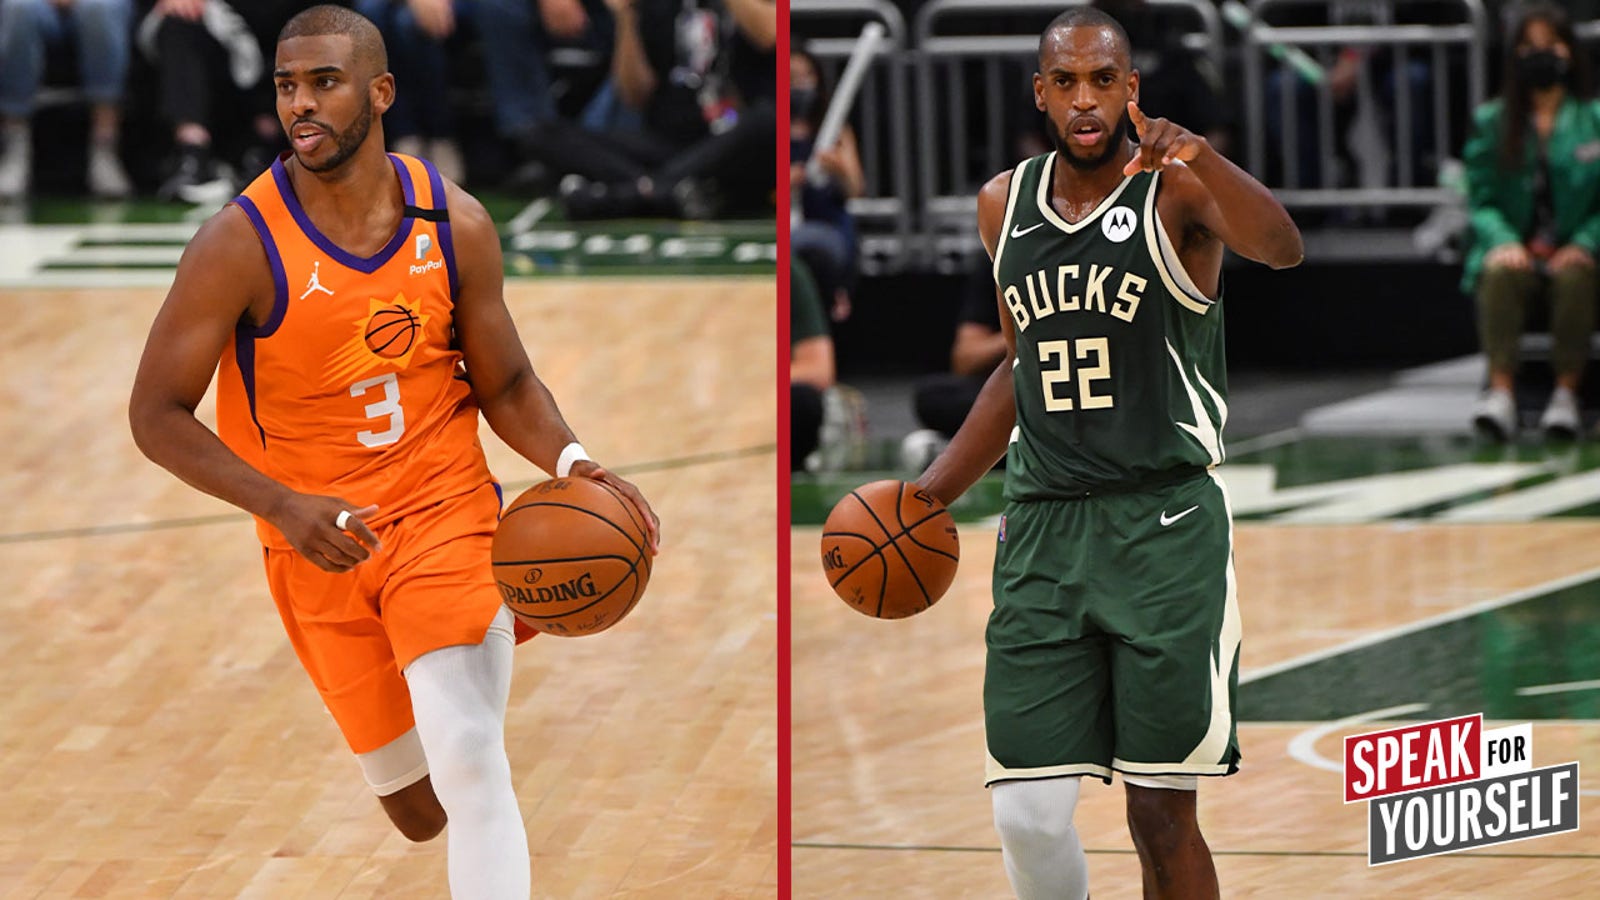 Marcellus Wiley: CP3 is the Finals' most important player because his play affects the Suns' outcome I SPEAK FOR YOURSELF